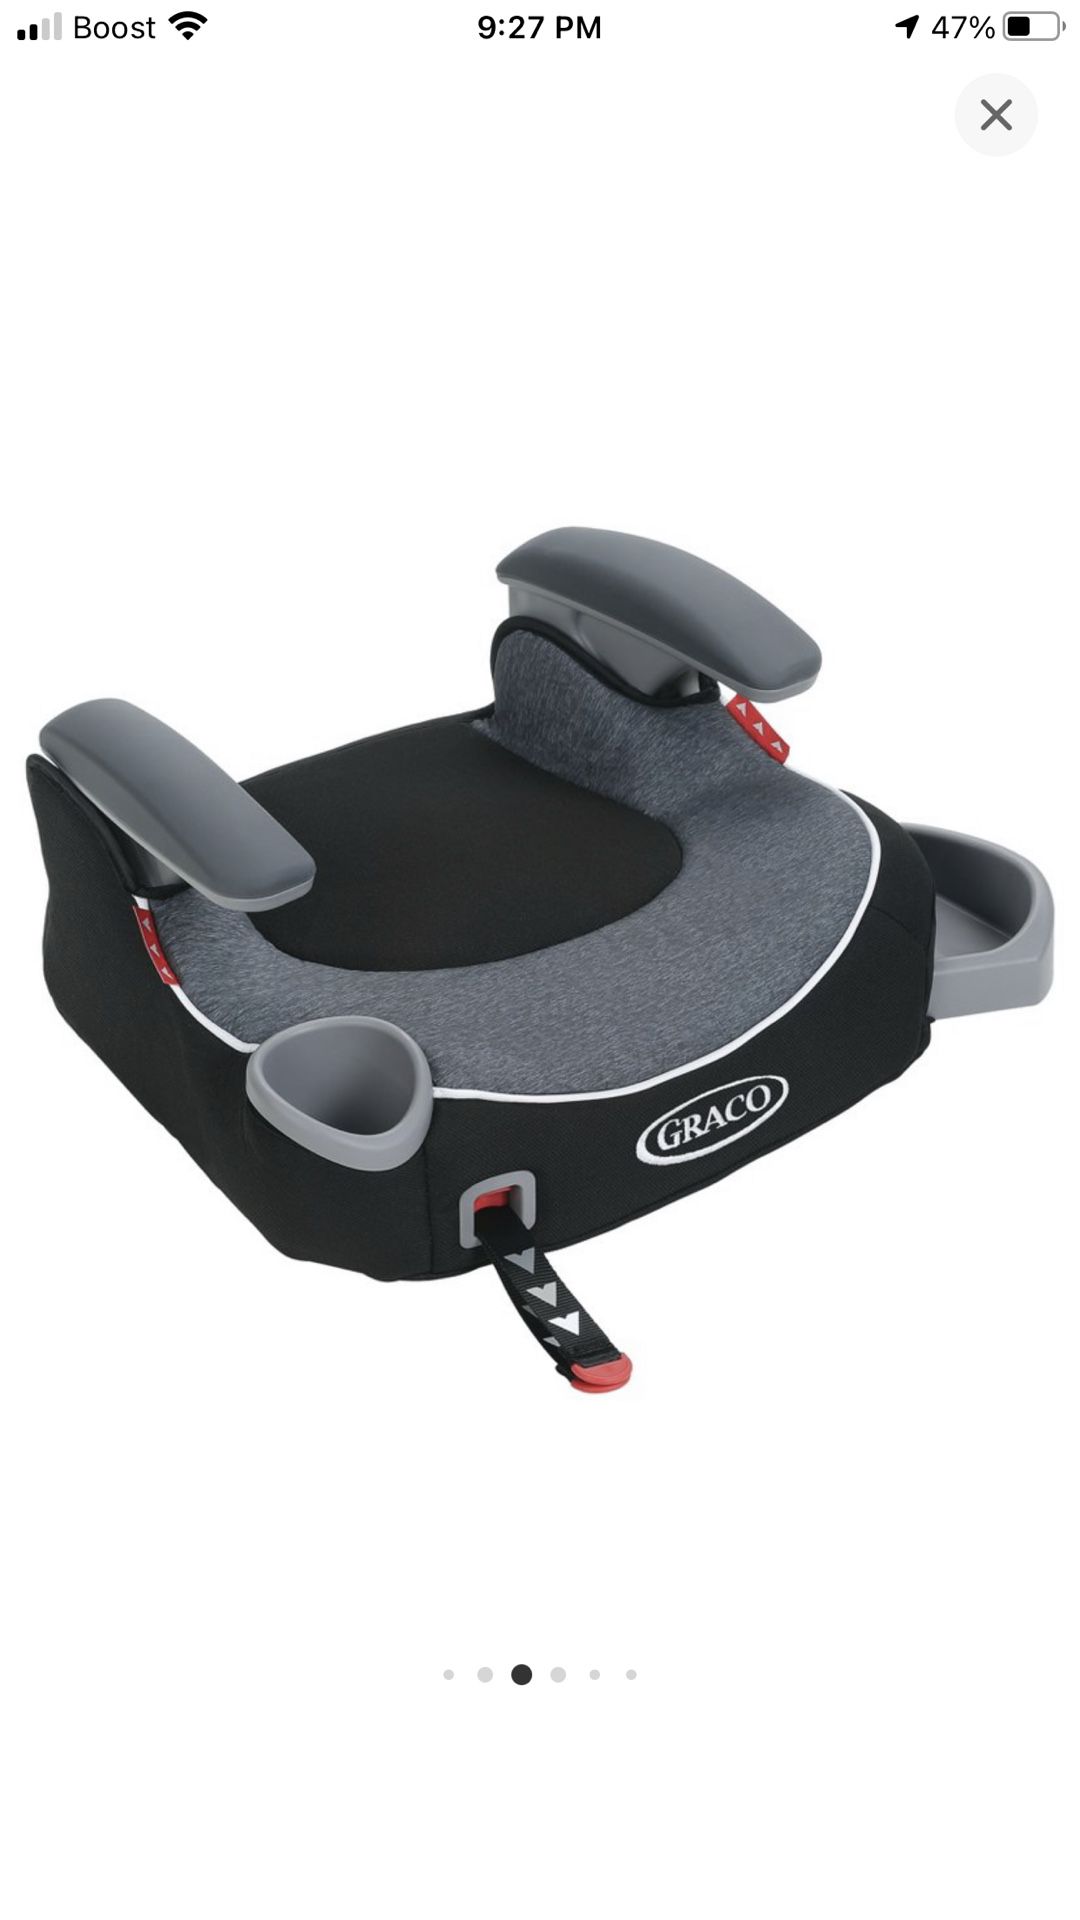 Graco Car seat /booster